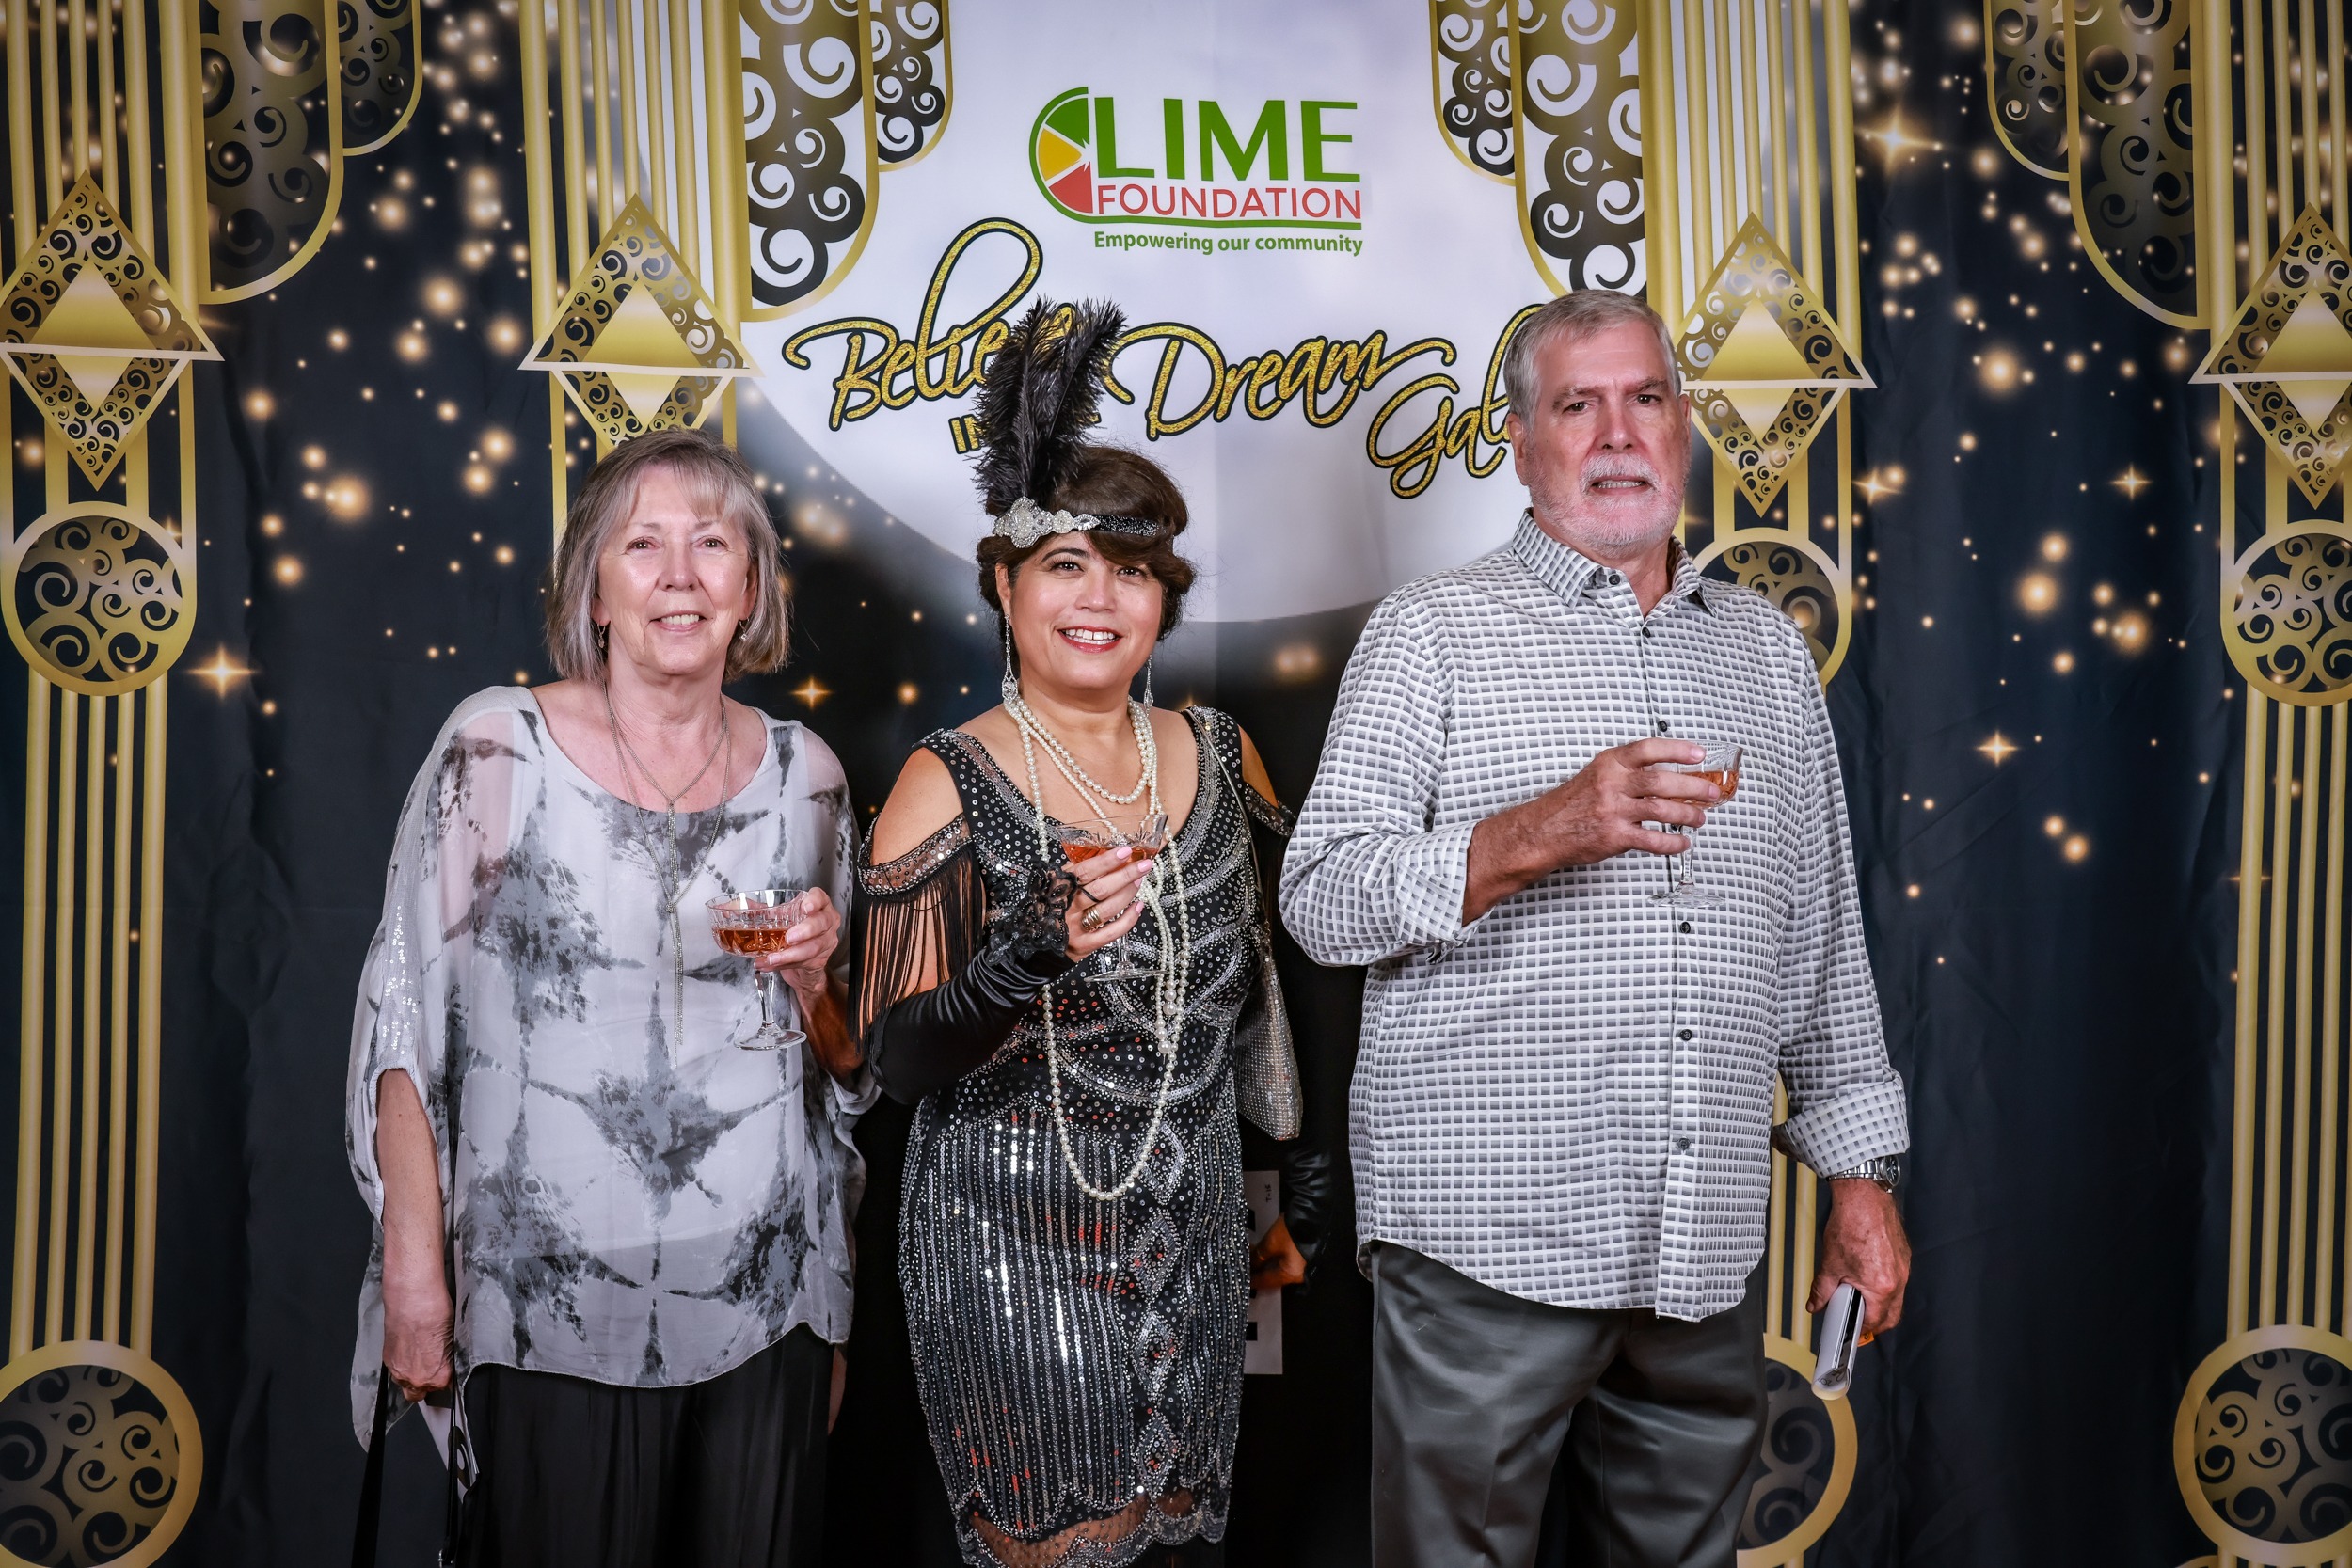 Three people posing for a photo at a 1920's themed event hosted by the LIME Foundation.